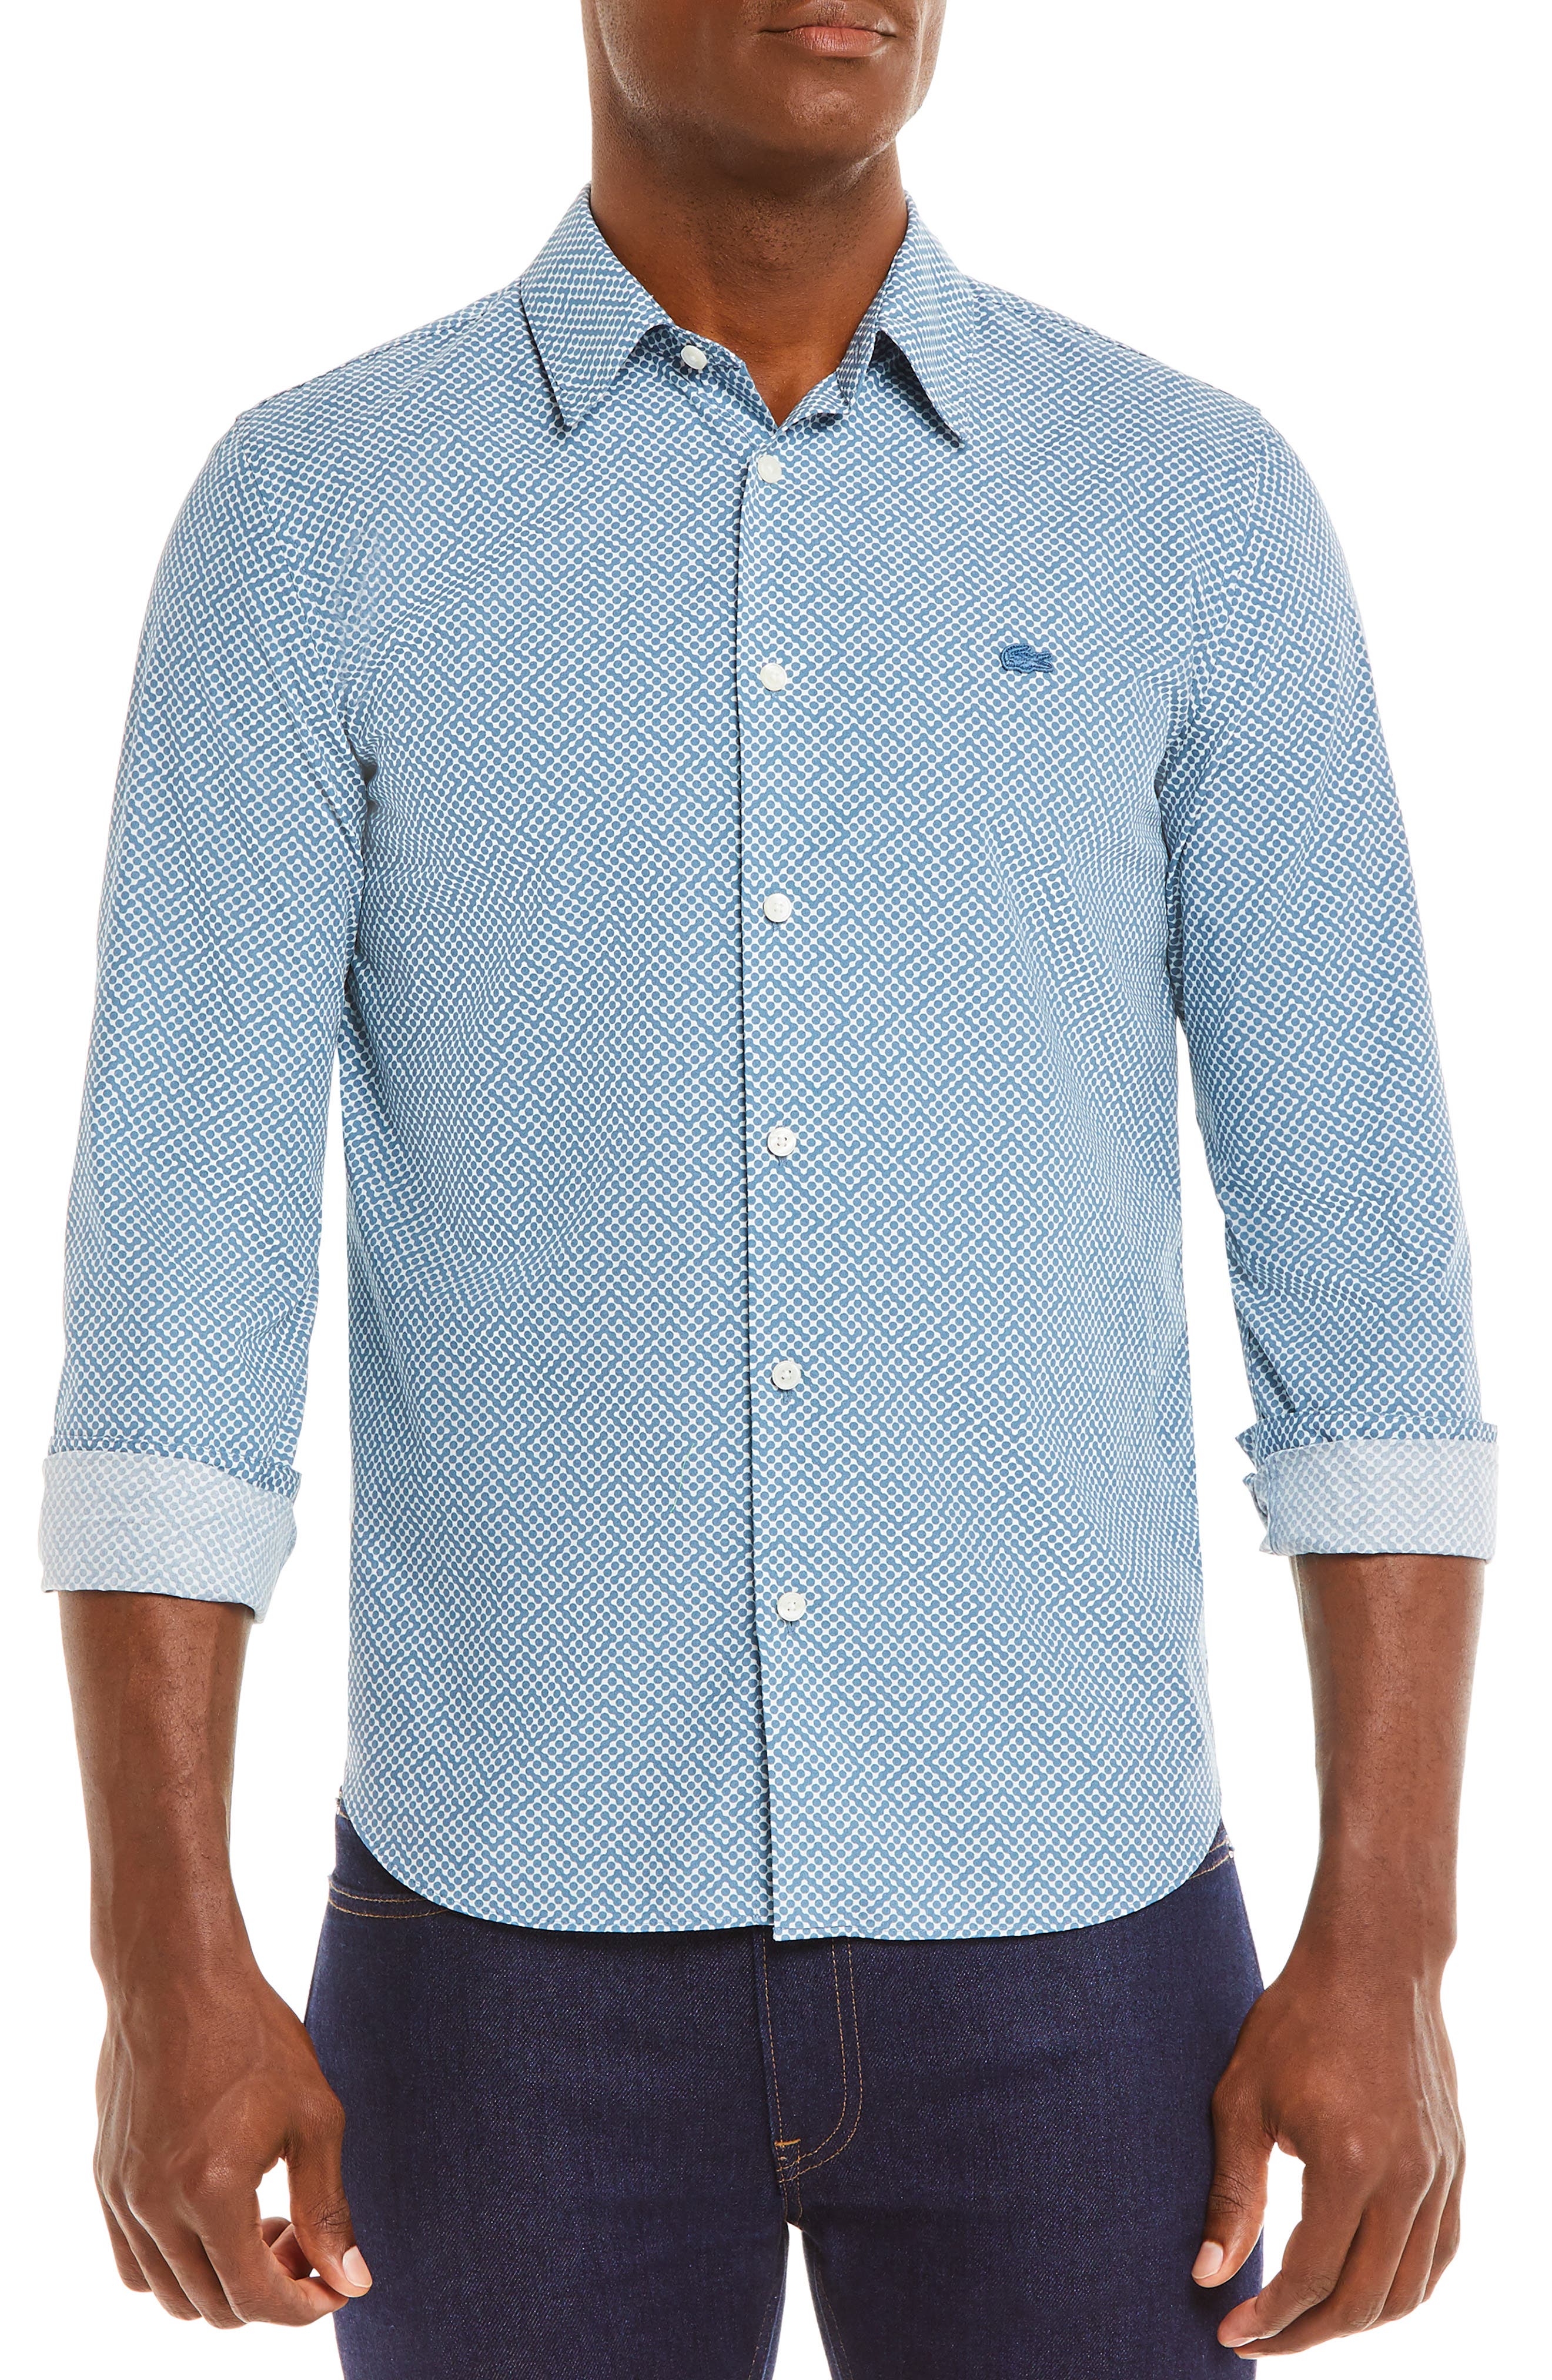 Men's Lacoste Button Up Shirts | Nordstrom